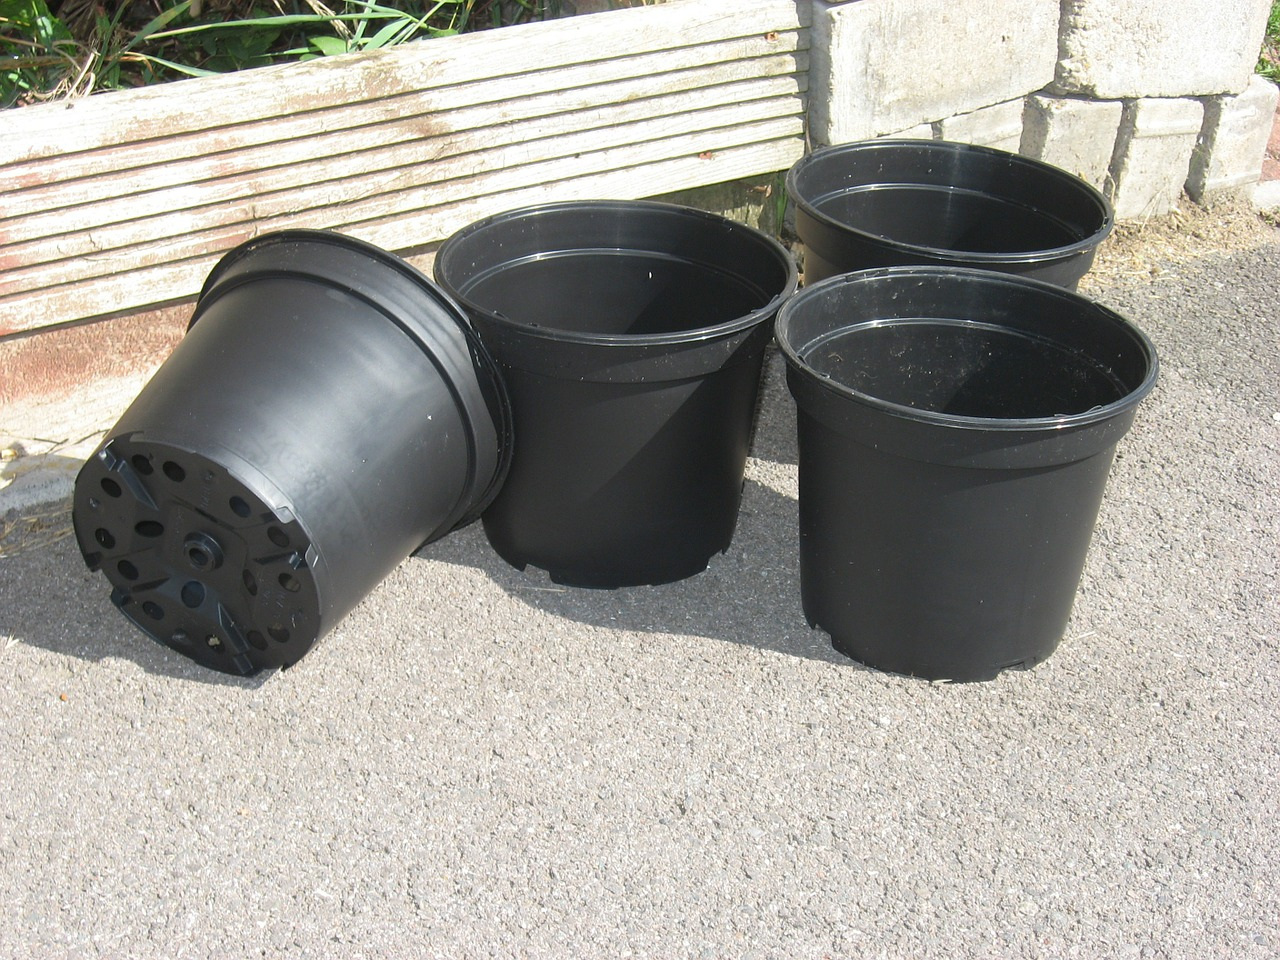 What Is A Dutch Bucket System And How To Build It?